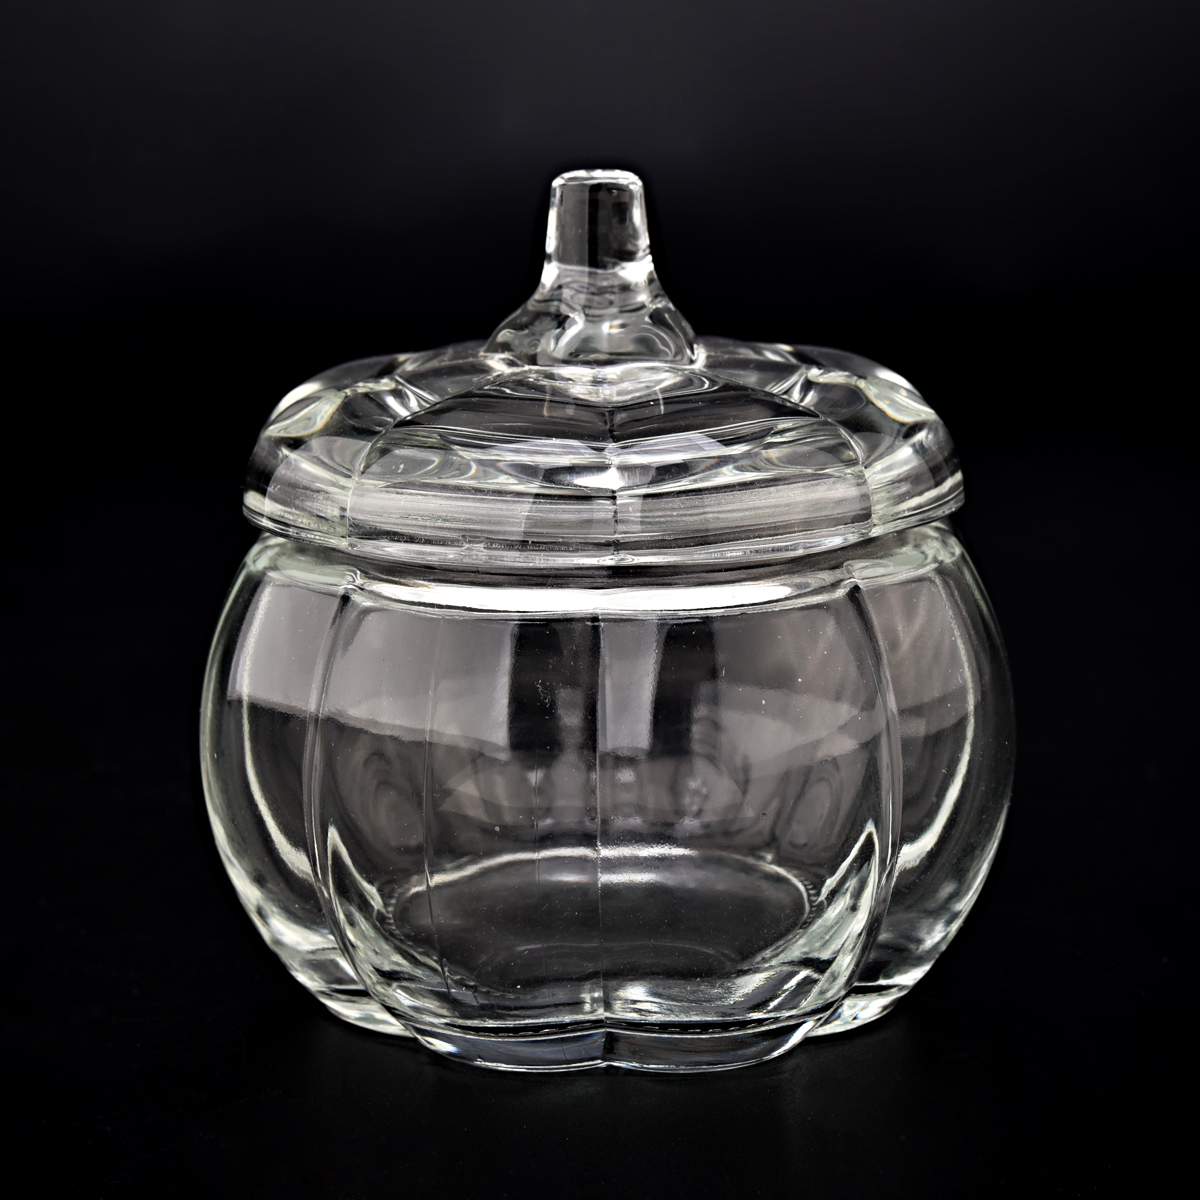 Luxury geographic cutting glass candle jars and candle holders with lid - COPY - sfc7vm